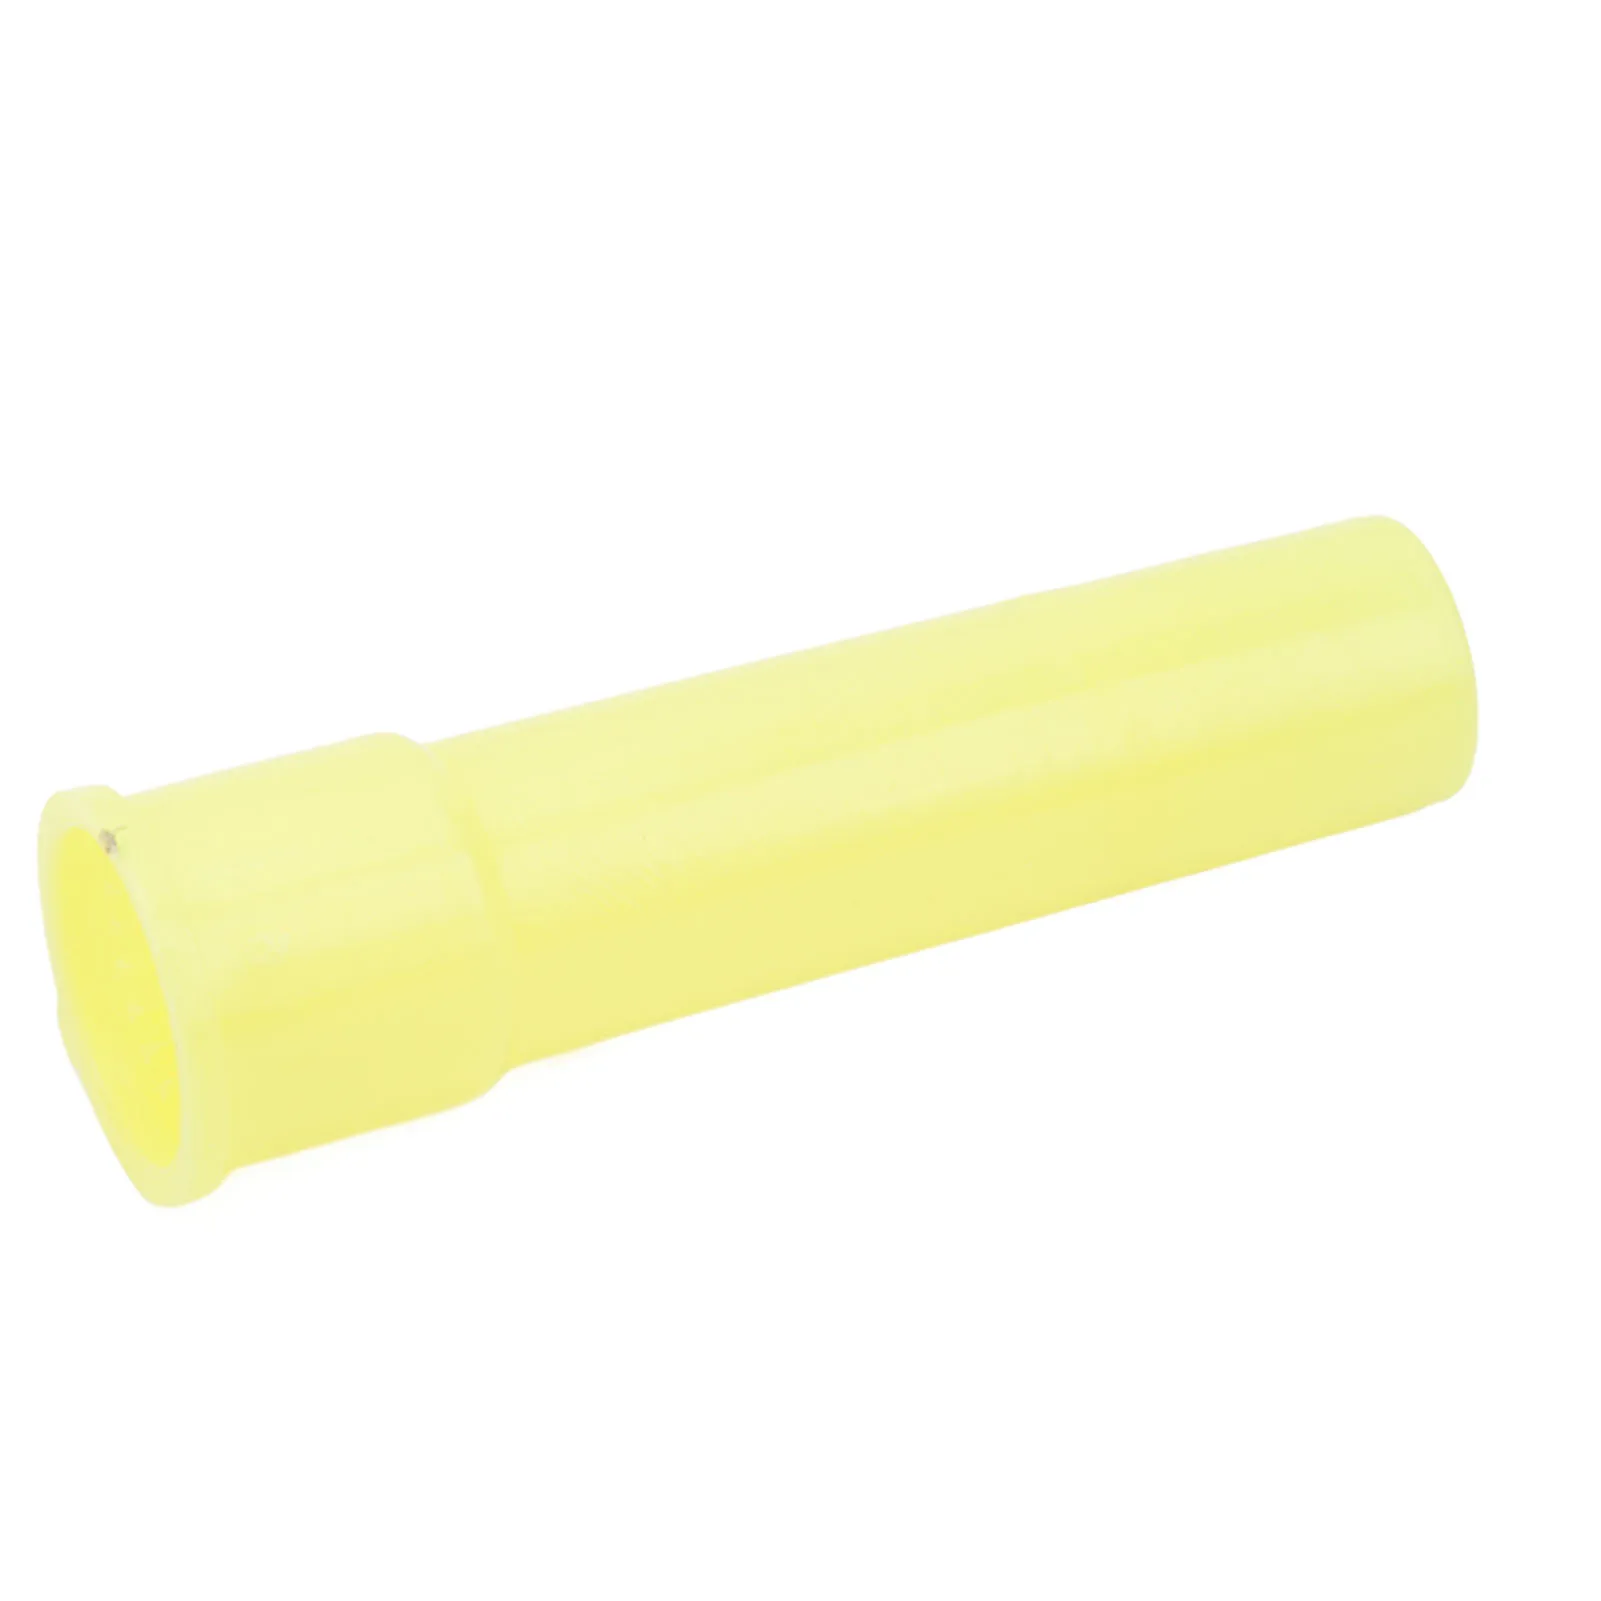 Engine Oil Dipstick Tube Guide 070115628 K G Yellow Car Accessories Fit For  7LA YL6 7L7 2003